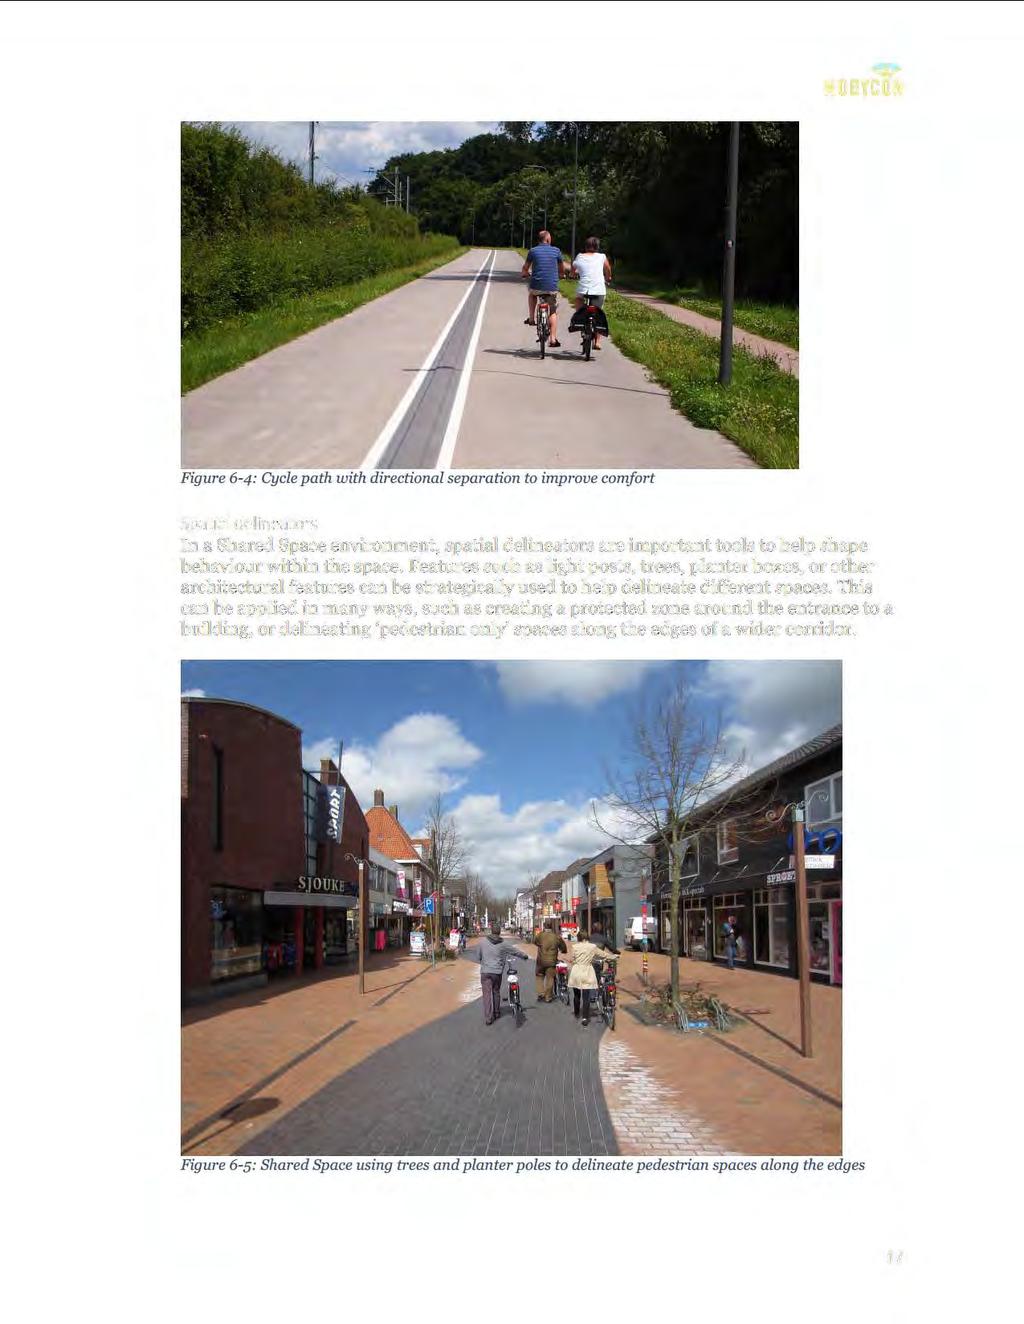 Figure 6-4: Cycle path with directional separation to improve comfort Spat ial delineators In a Shared